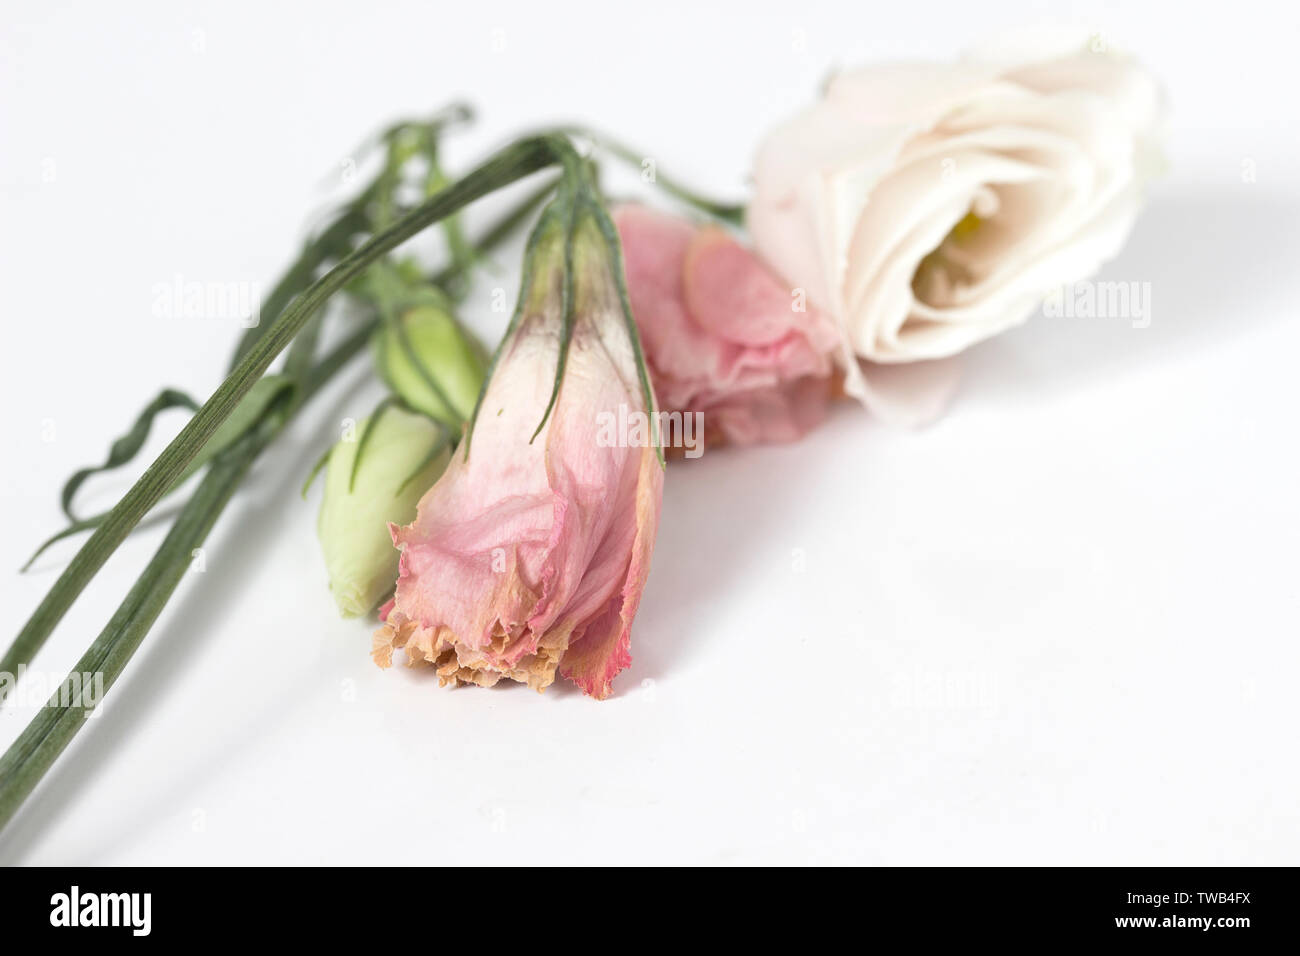 Dried flower over white background. Wilted flowers Stock Photo